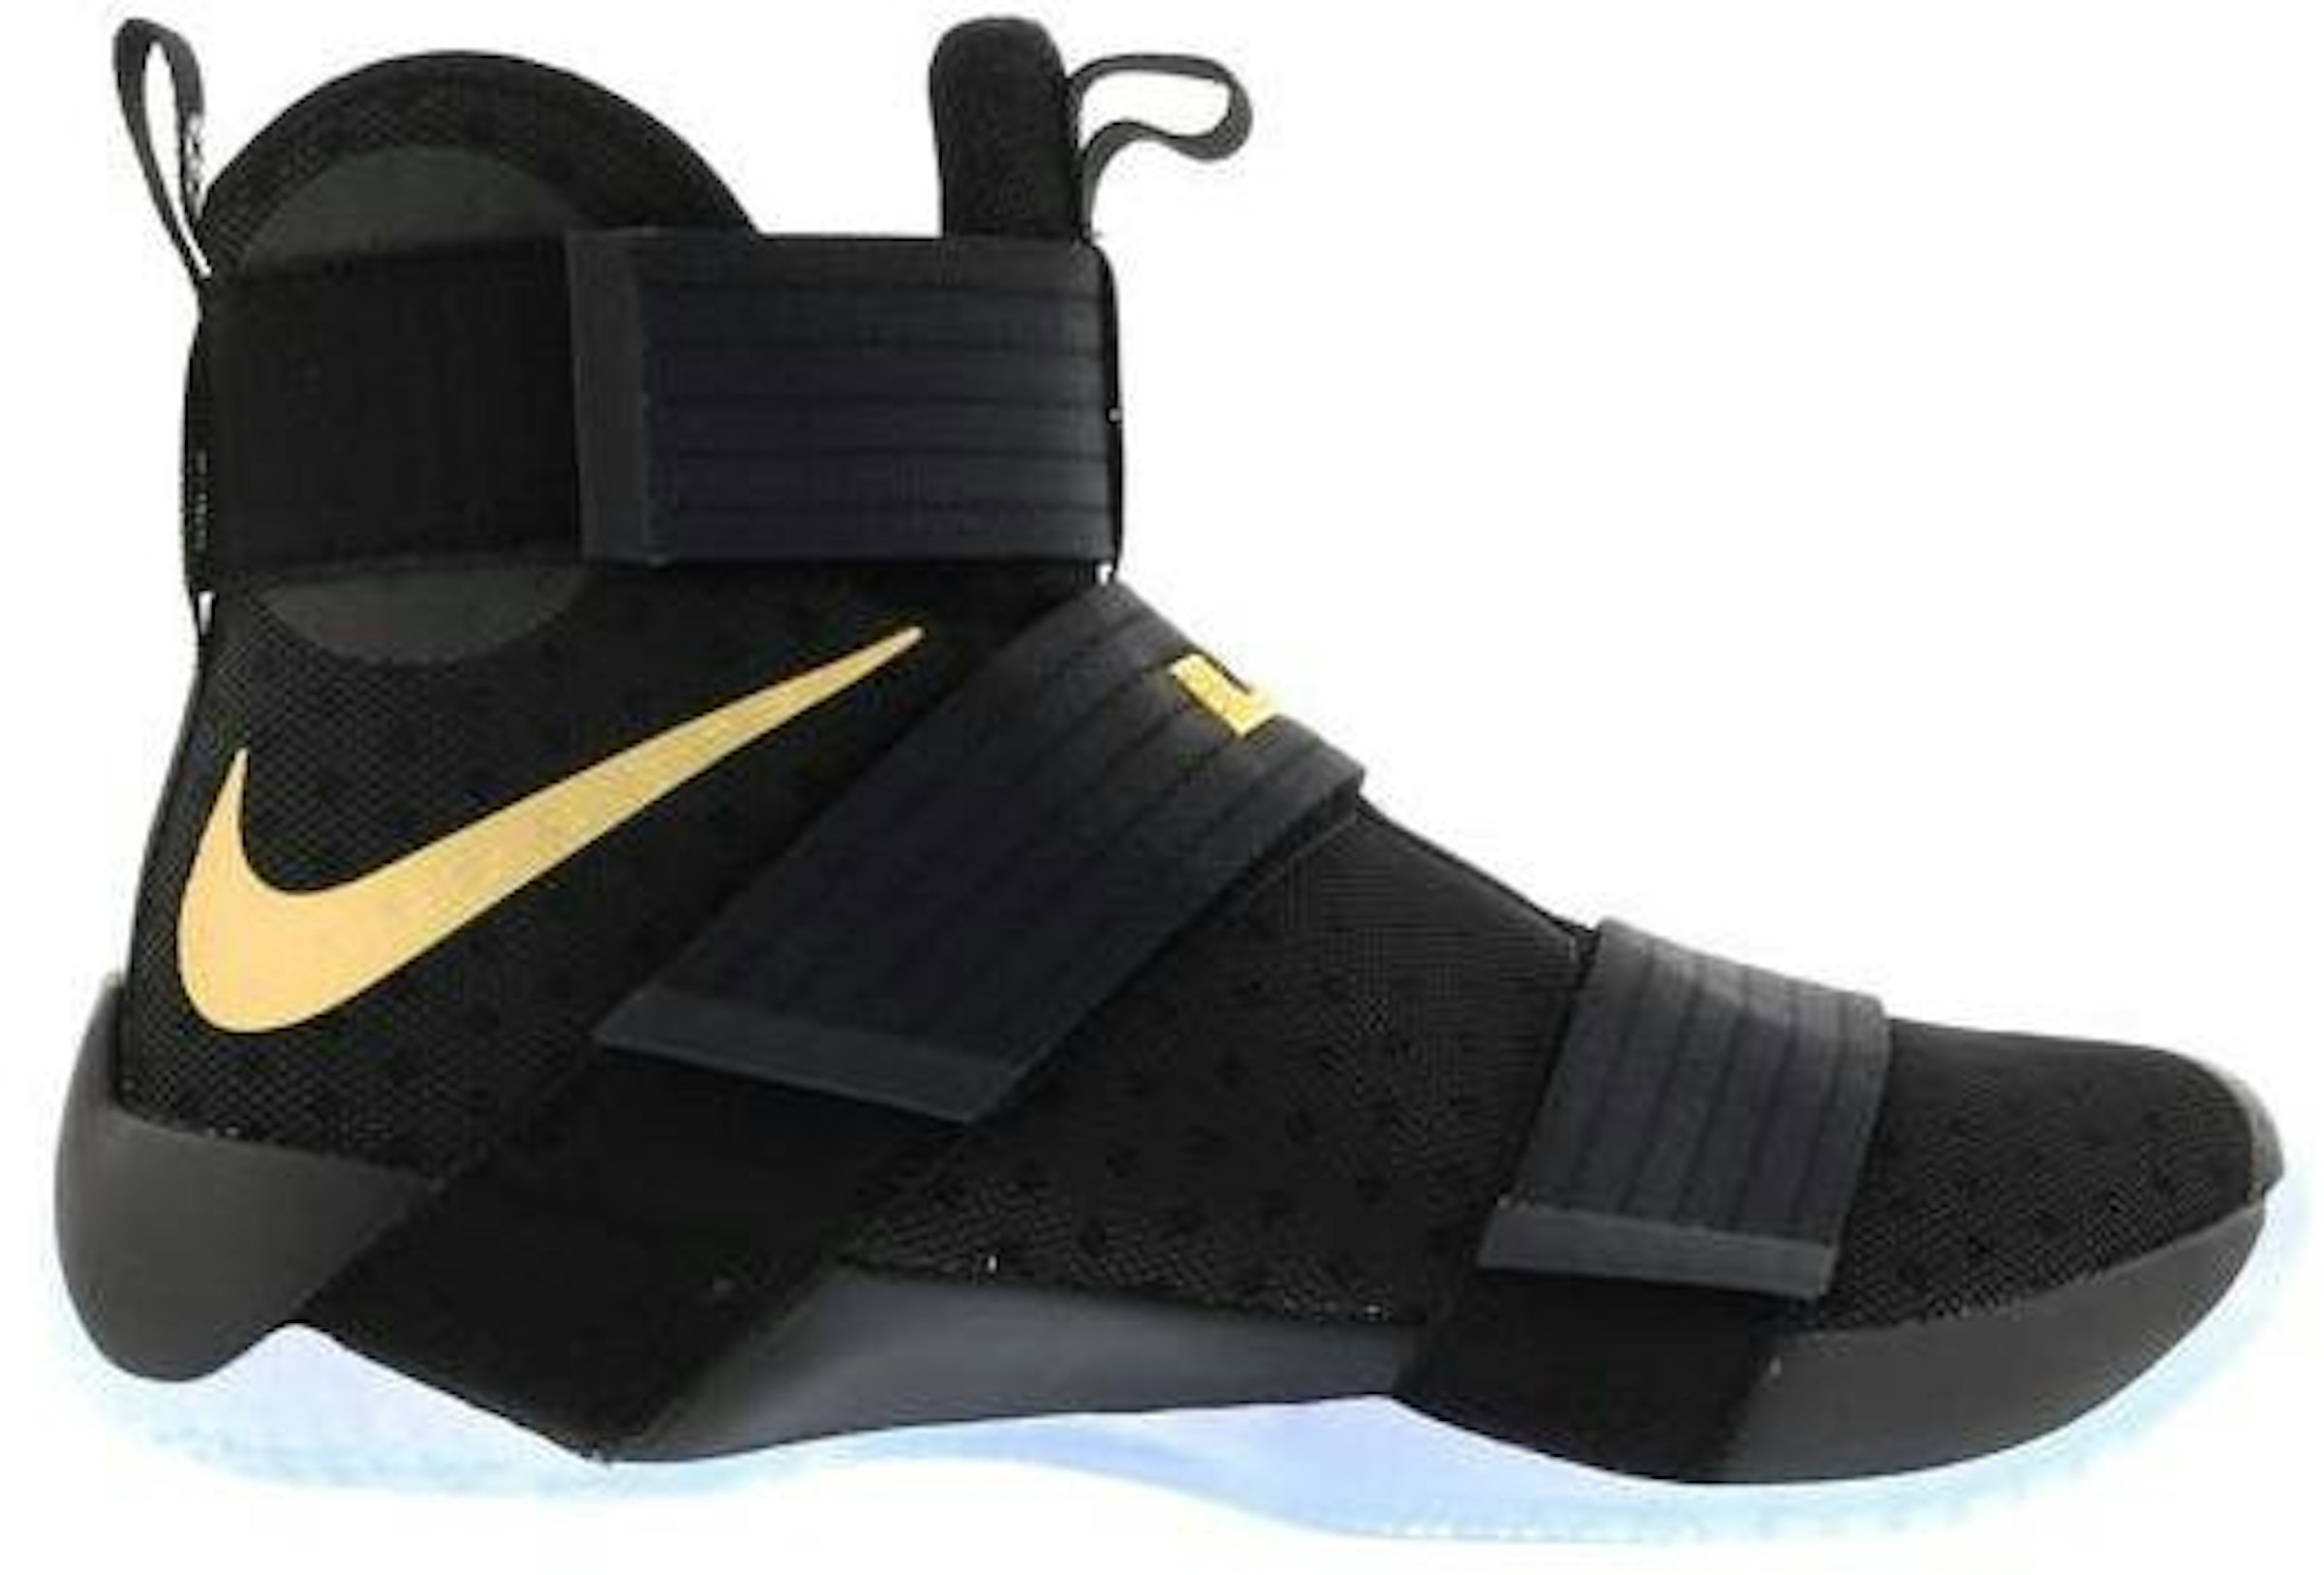 Nike LeBron Soldier 10 Black Gold (Nike iD) Hombre - 885682-991/885682-993 - US